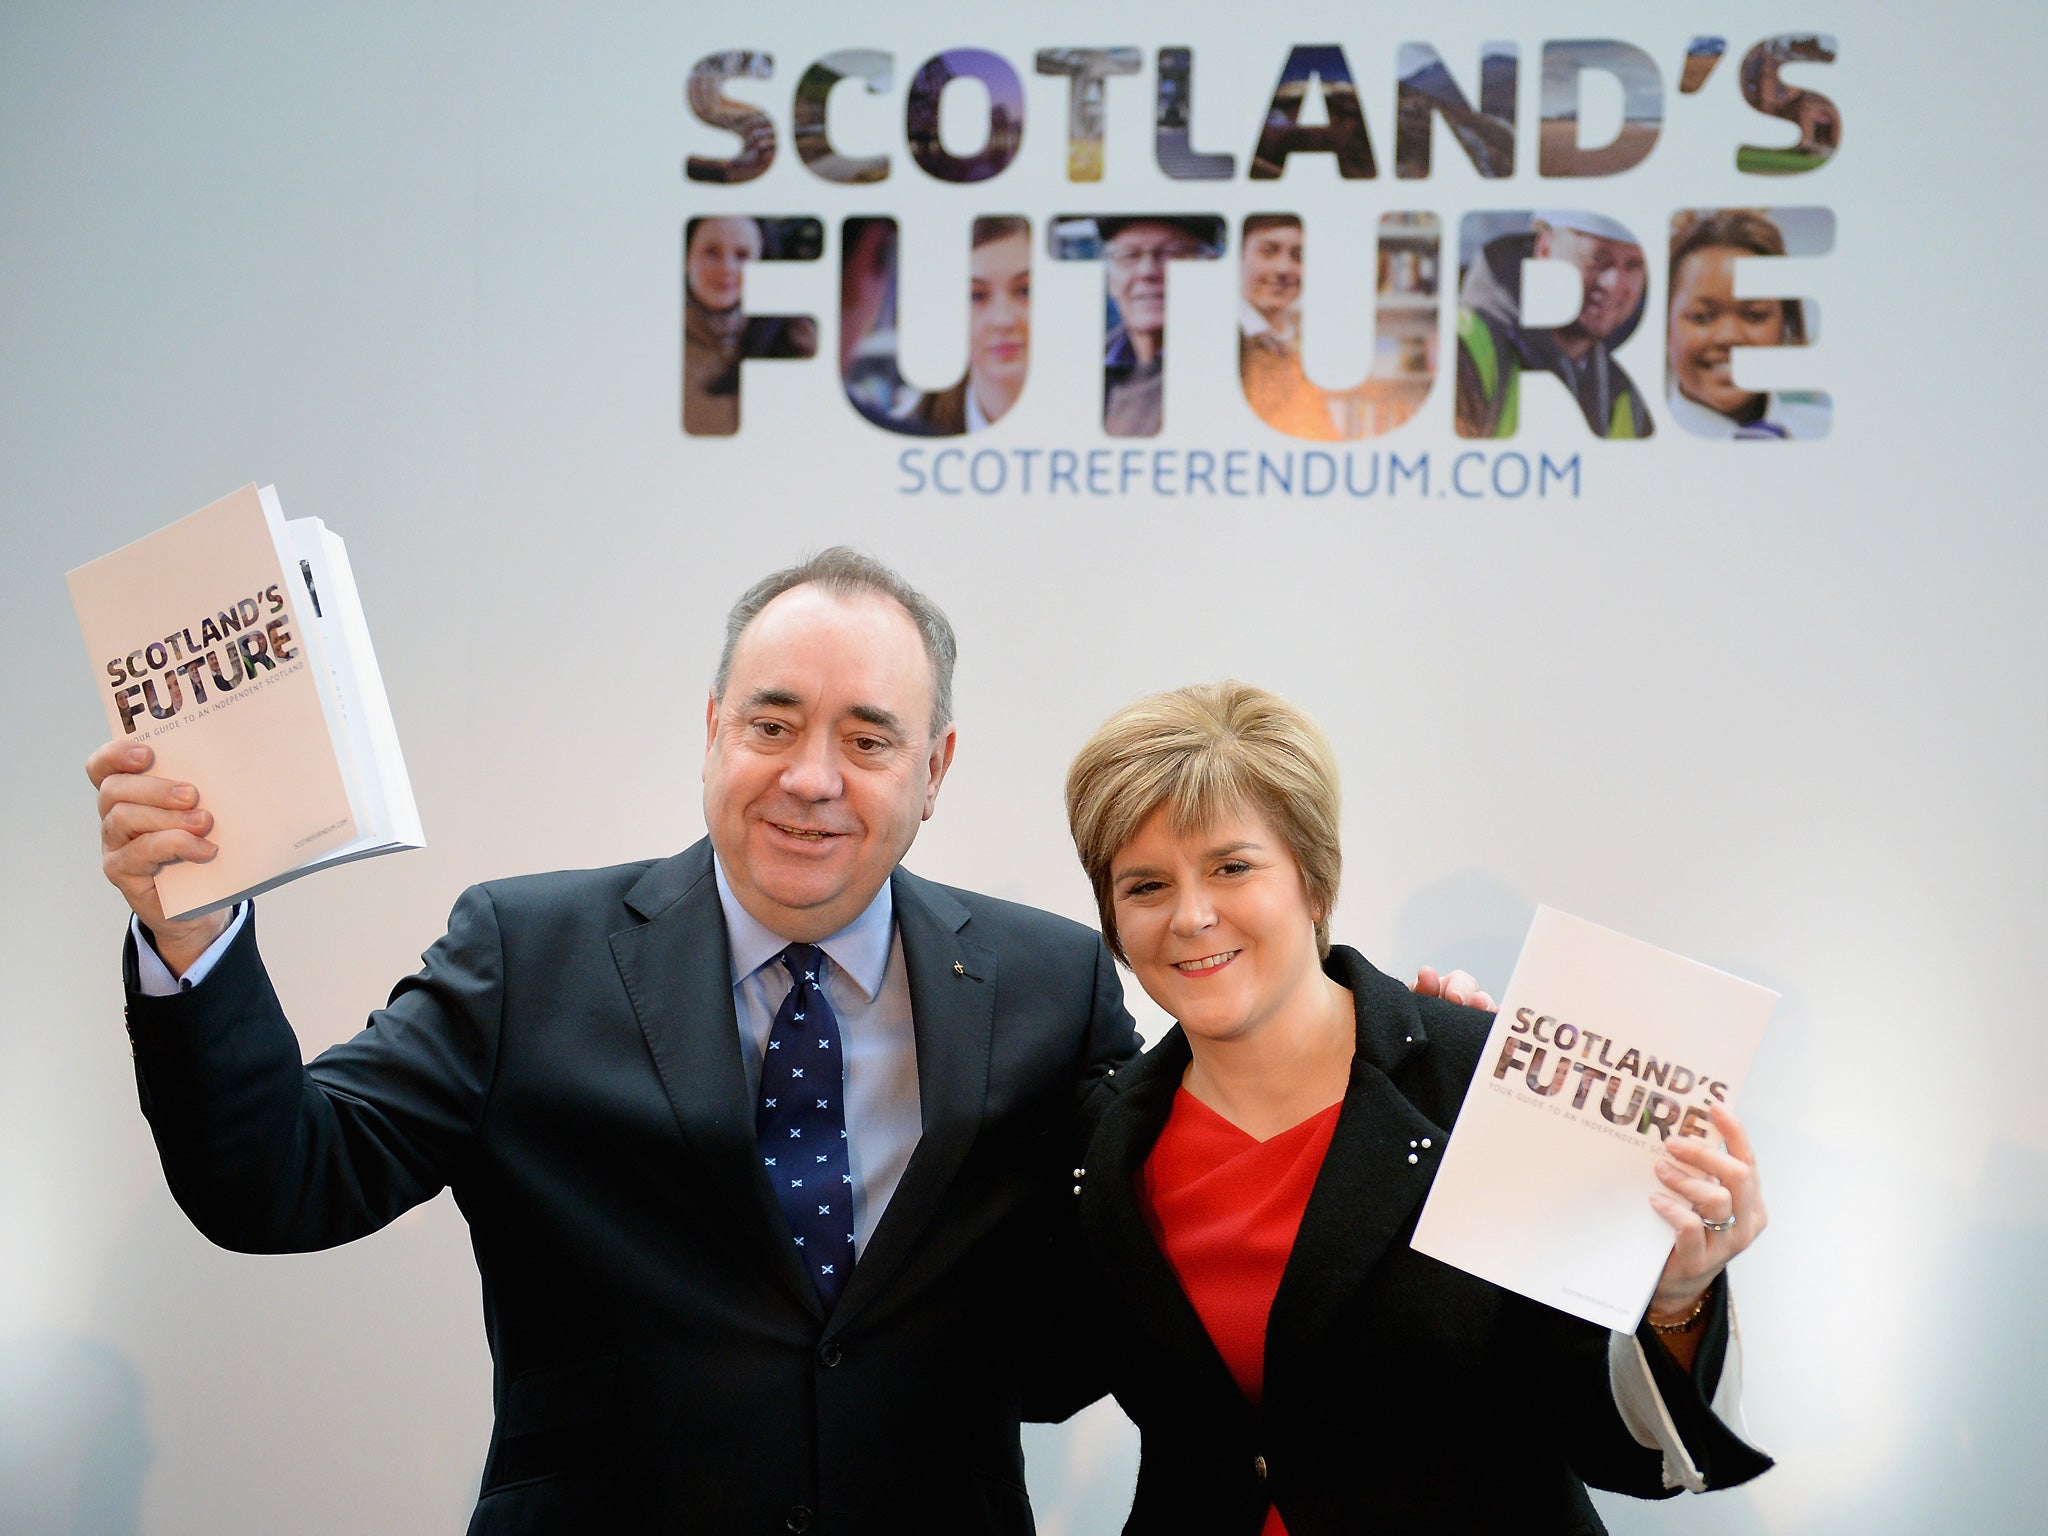 Alex Salmond and Deputy First Minister Nicola Sturgeon present the White Paper for Scottish independence in November 2013 in Glasgow